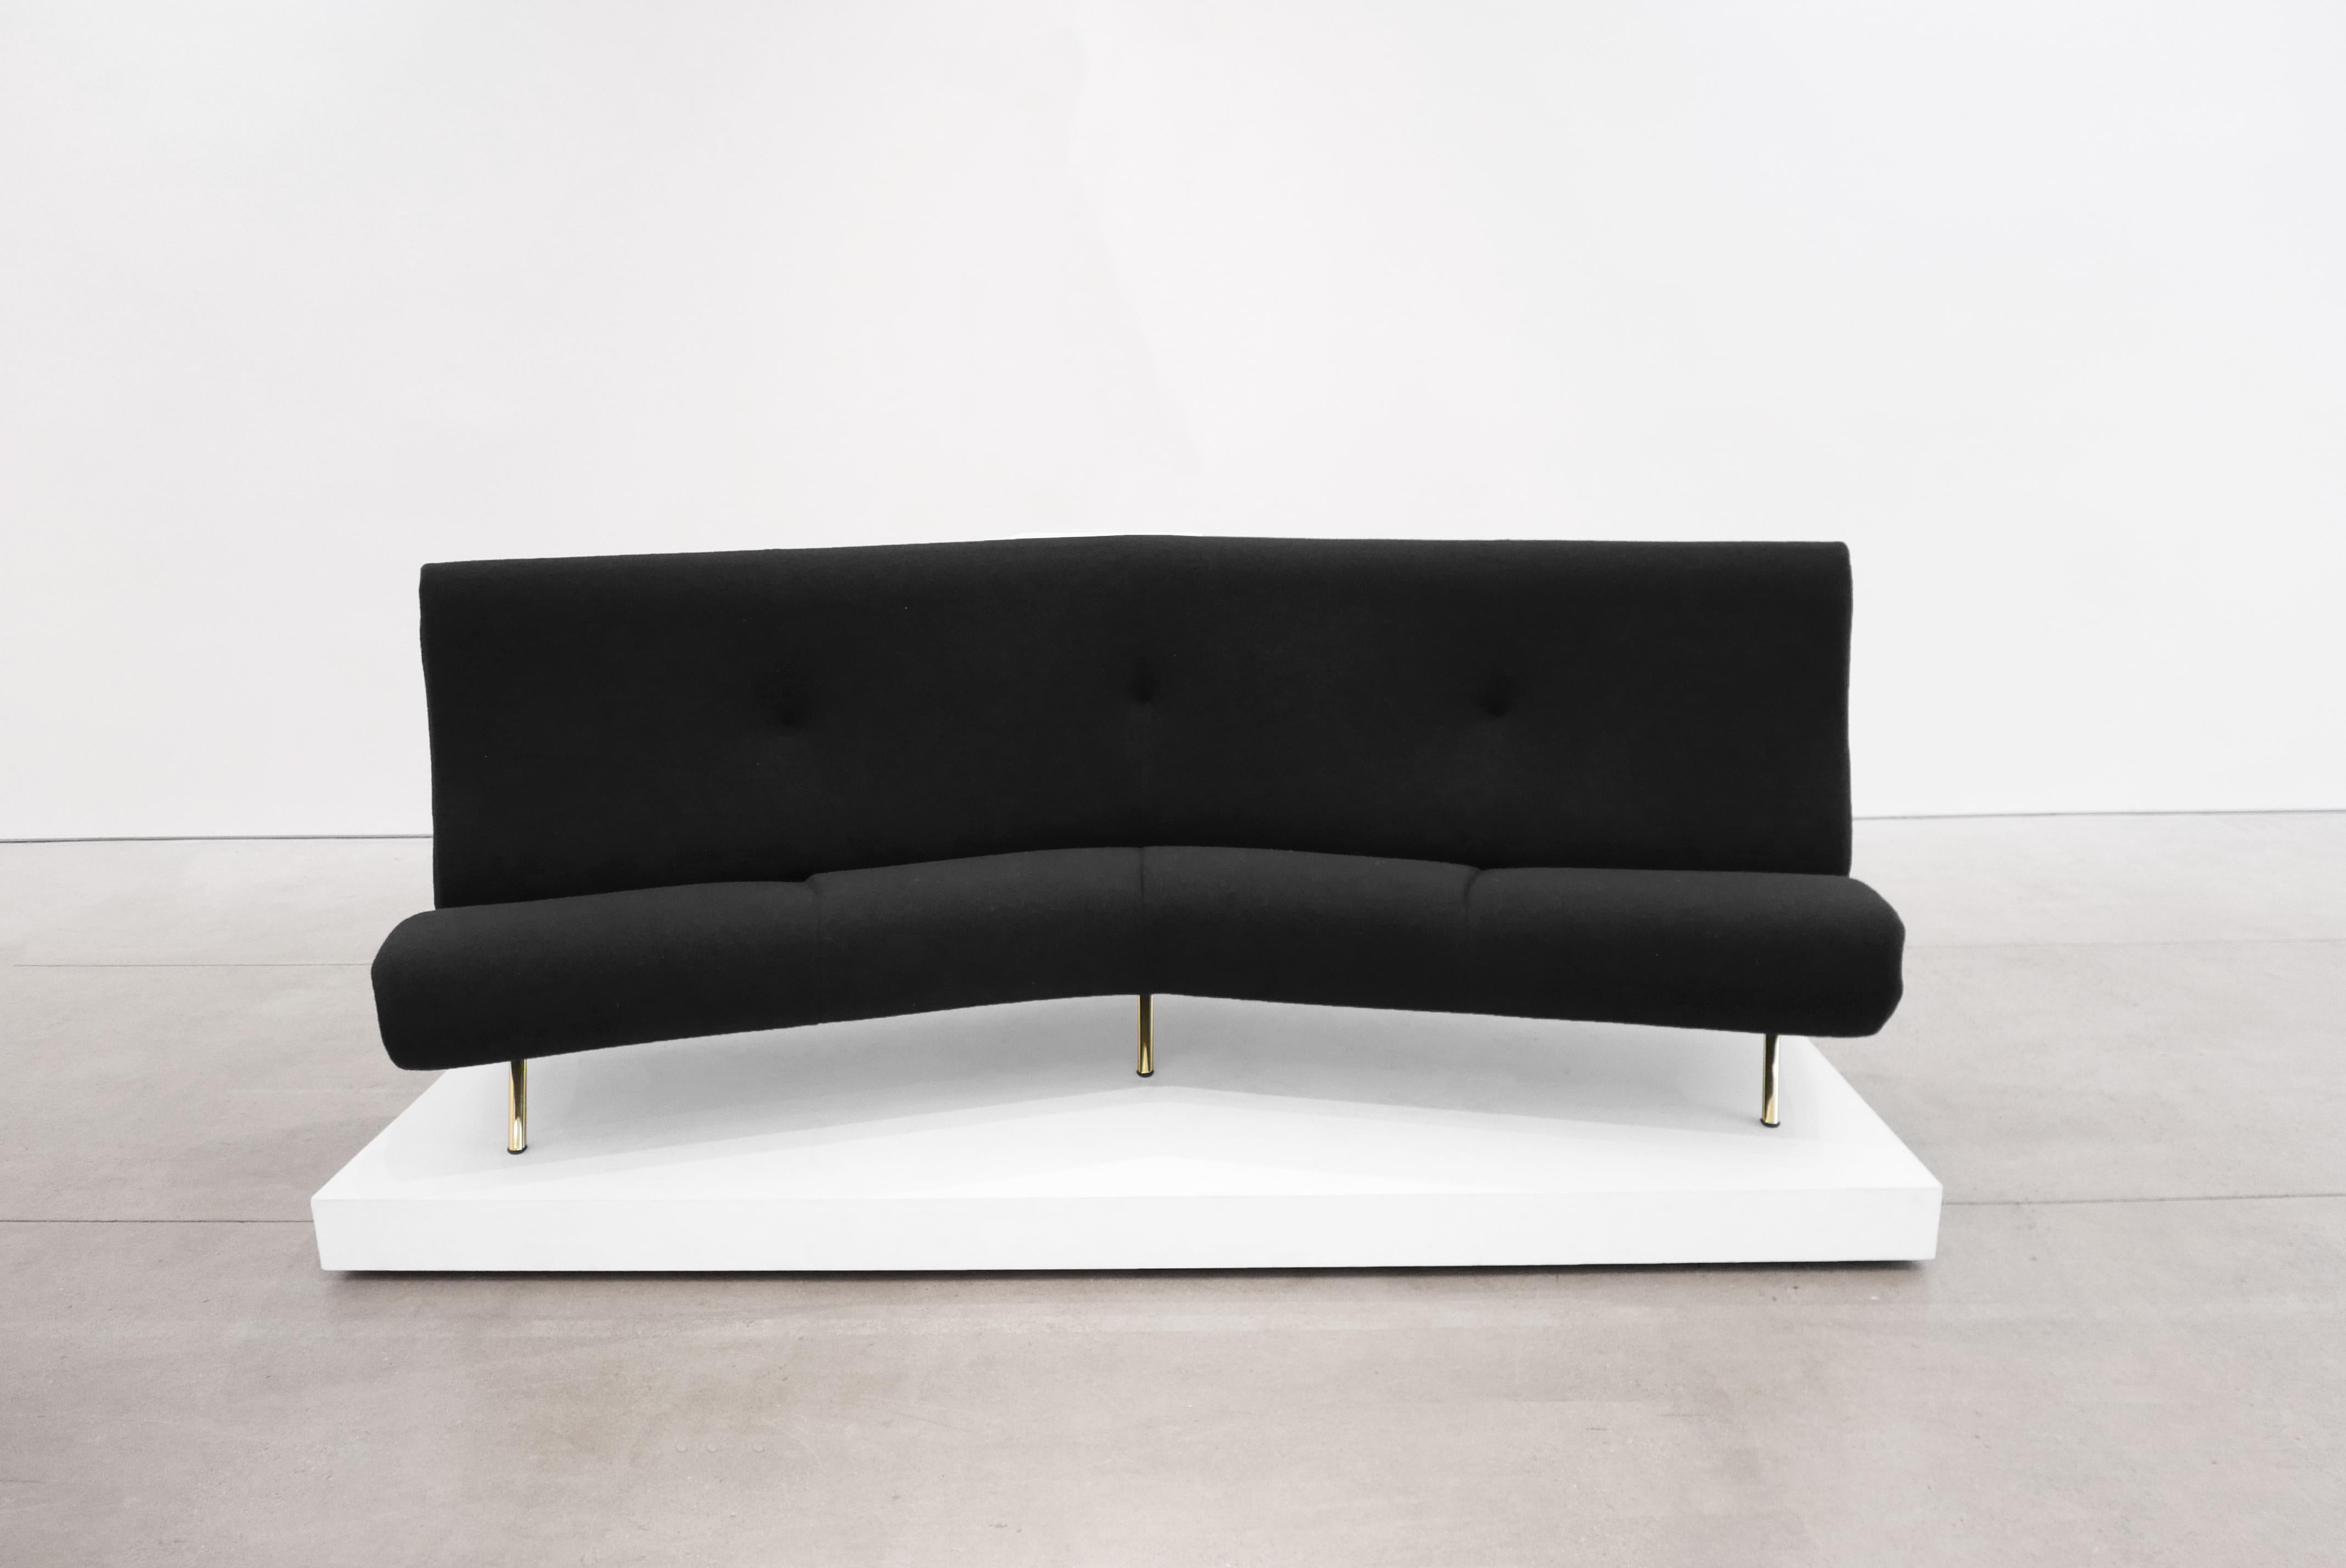 Marco Zanuso 'Triennale' corner sofa for Arflex,
Italy, circa 1950s
Brass-plated steel, Holland and Sherry boiled wool (Color Chamonix black)
Measures: 34 H x 99 W x 30 D inches.